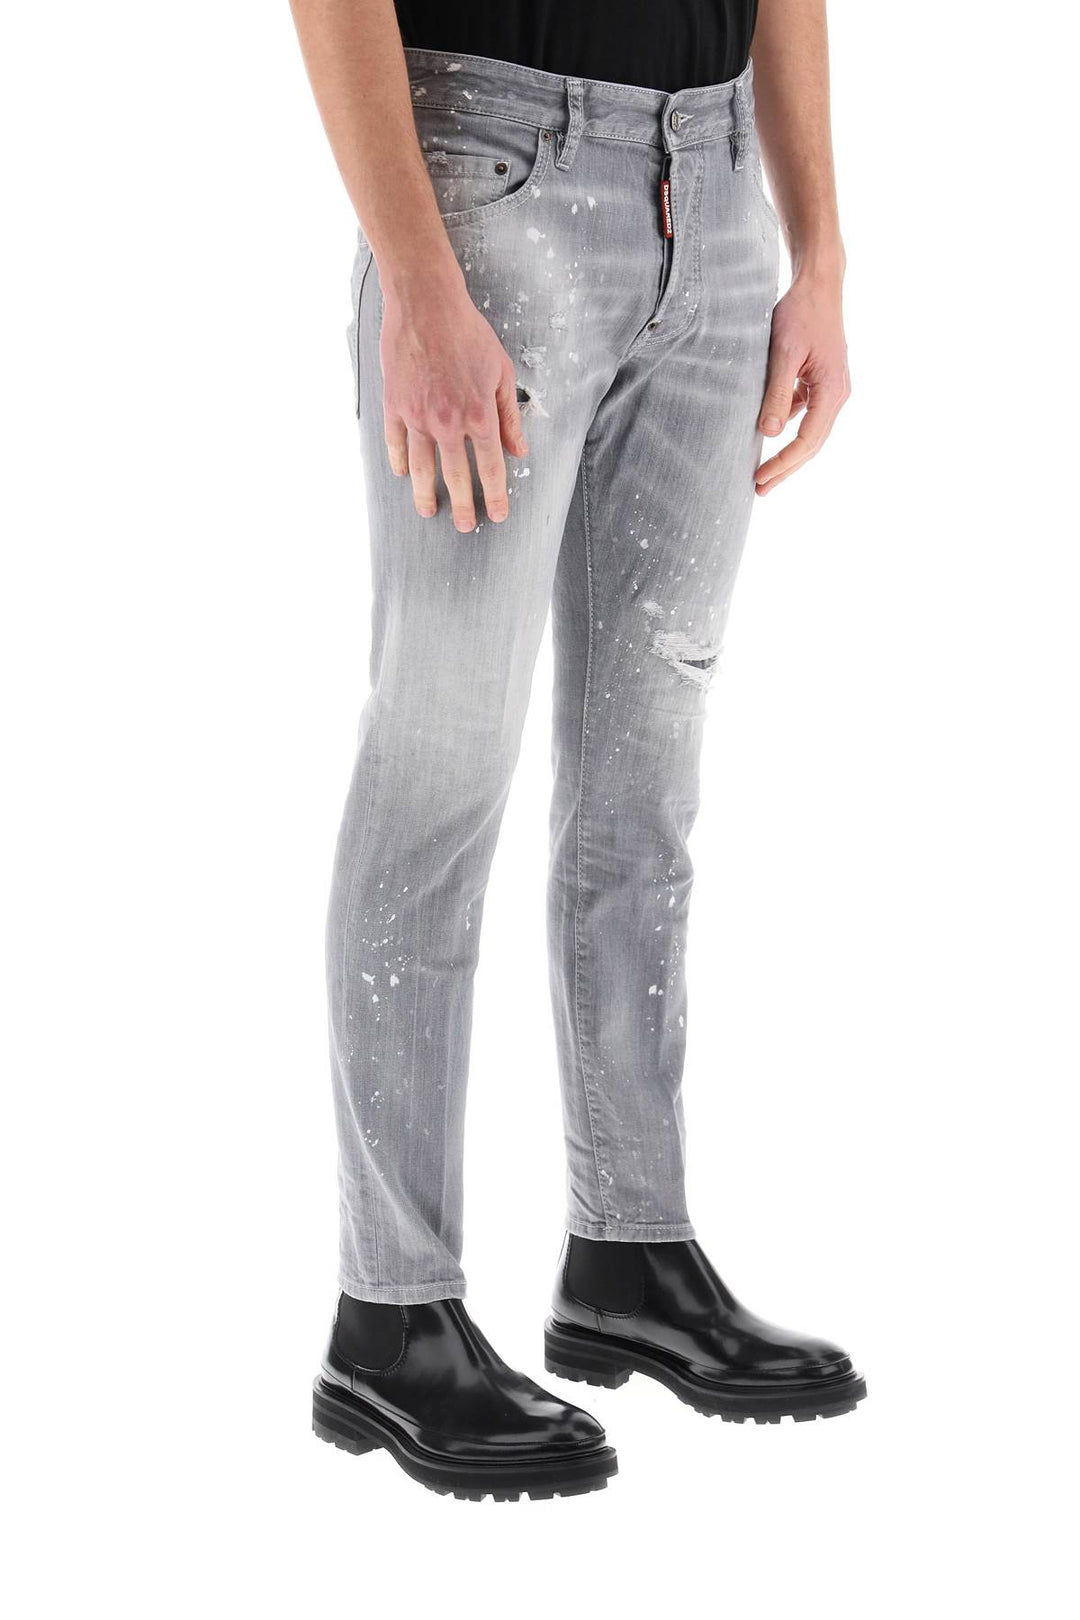 Dsquared2 Skater Jeans In Grey Spotted Wash   Grigio